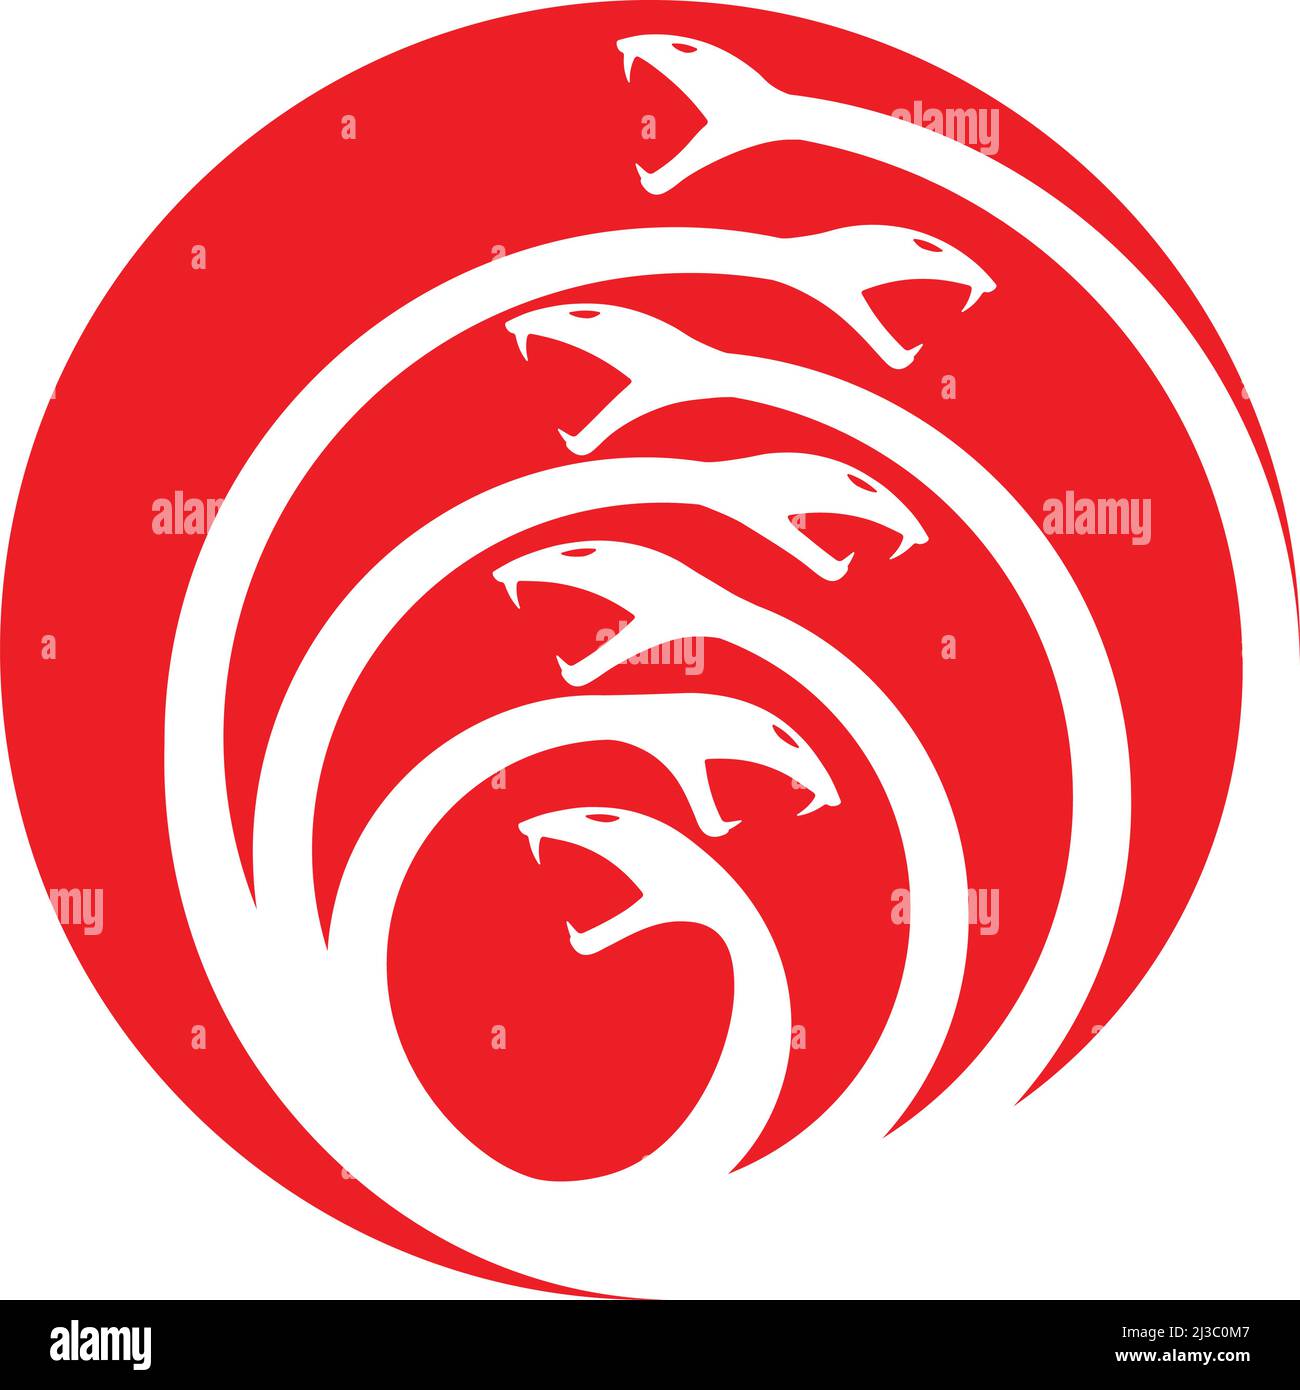 Seven Head Hydra symbol ouroboros style red and white Stock Vector